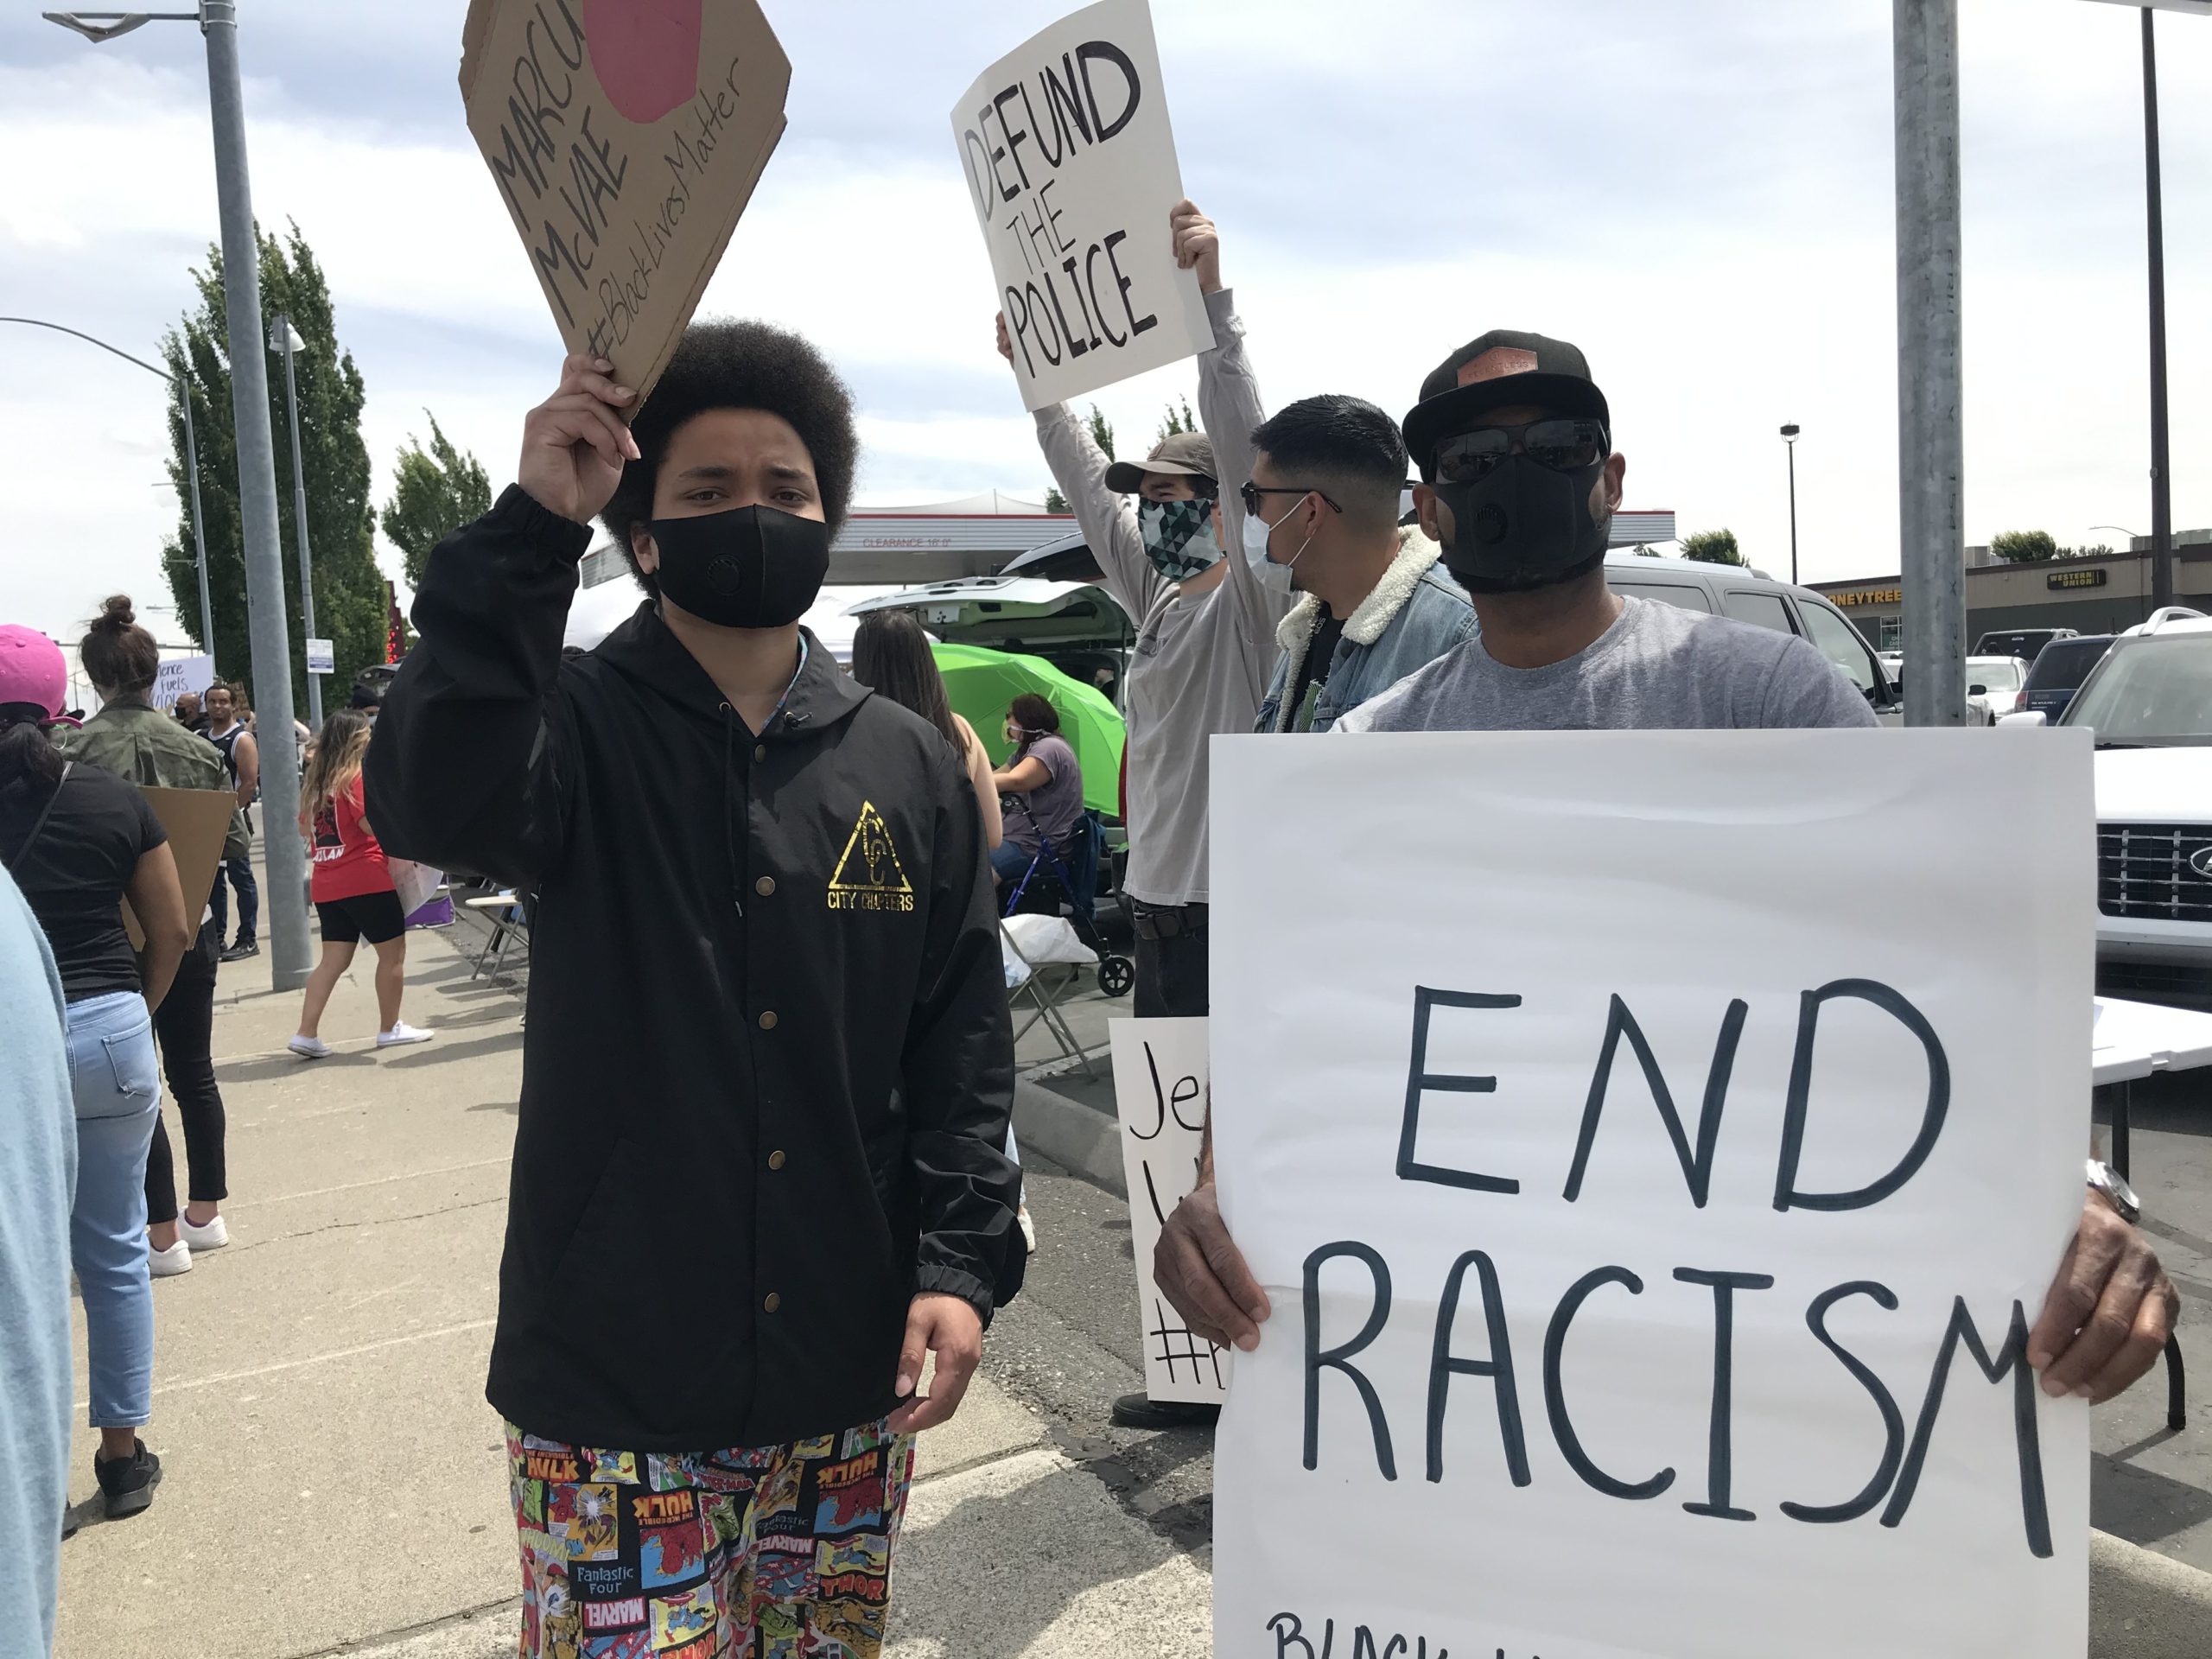 Rapper Karma (left), who started making music in Richland and now lives in Seattle, said people weren’t doing enough before now. He said the protesters were “warming his heart to see how much love is in this city.” CREDIT: Courtney Flatt/NWPB